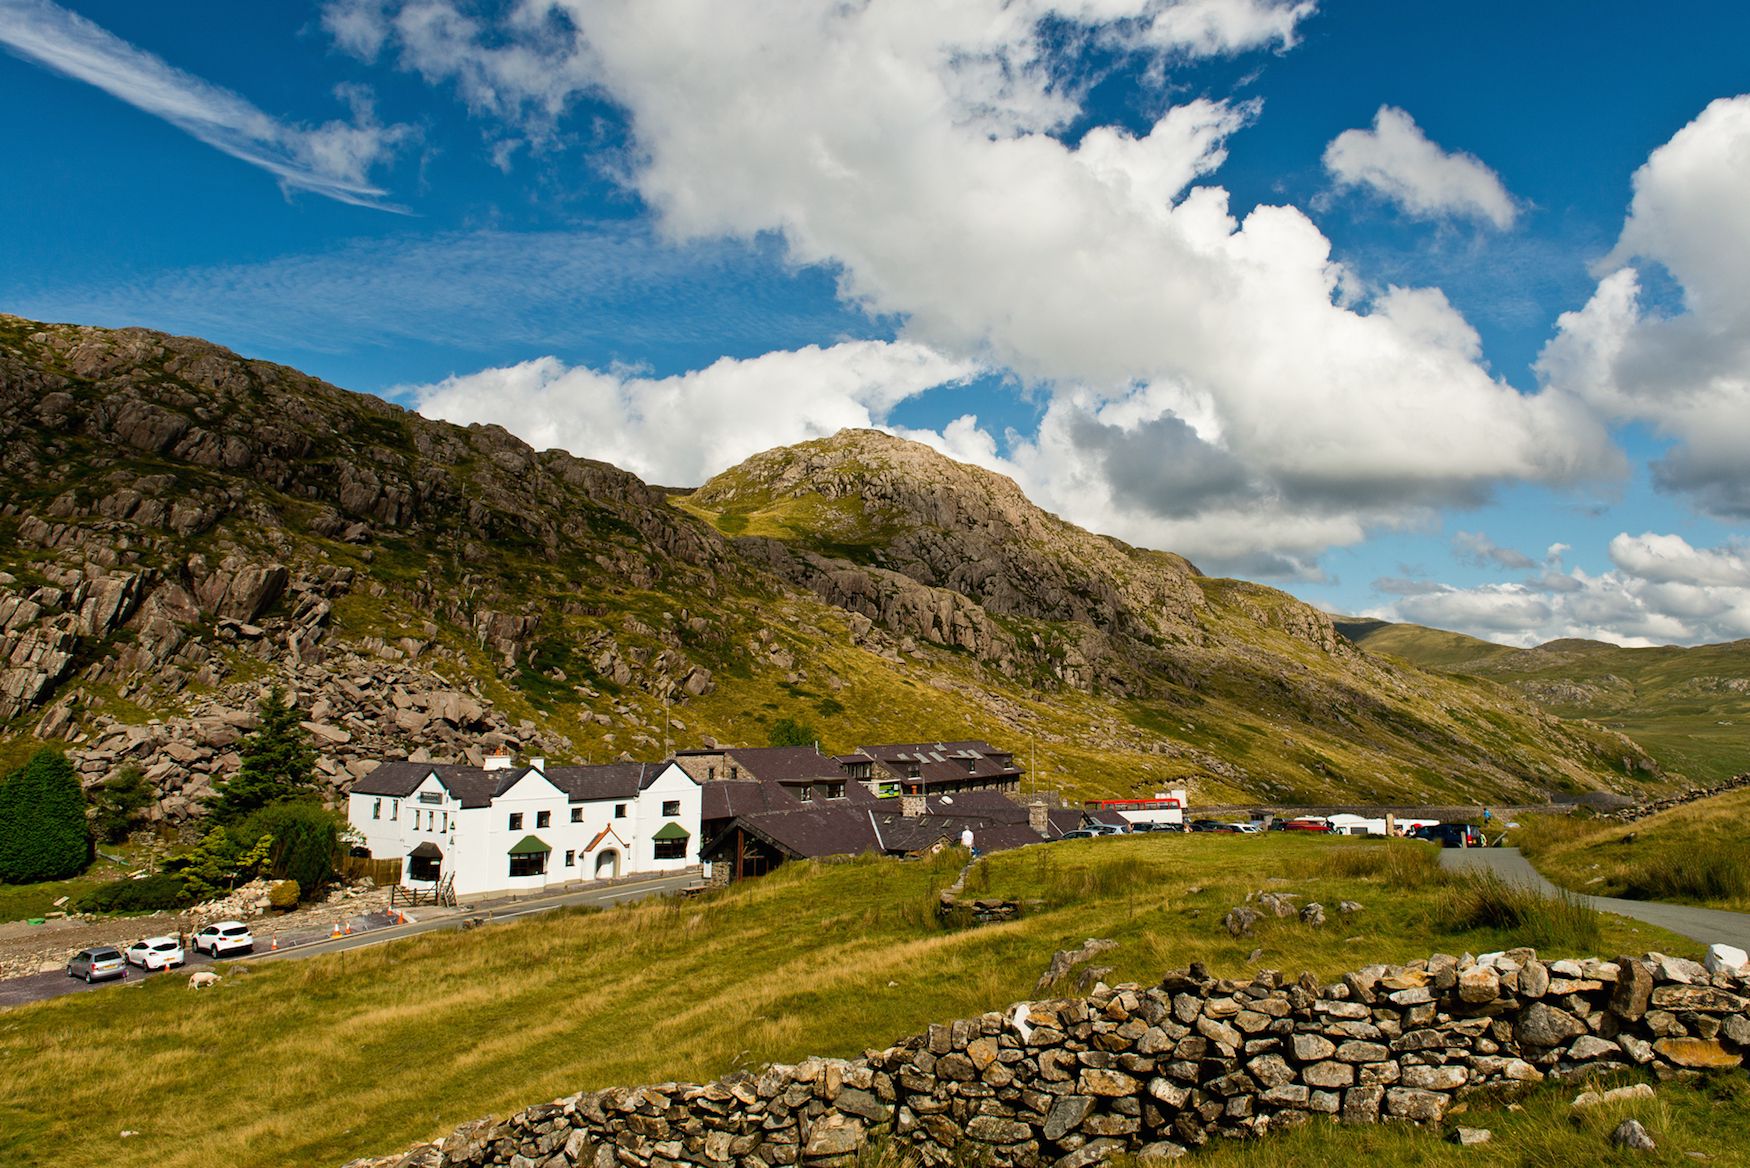 Hotels, Cottages, B&Bs & Glamping in Snowdonia